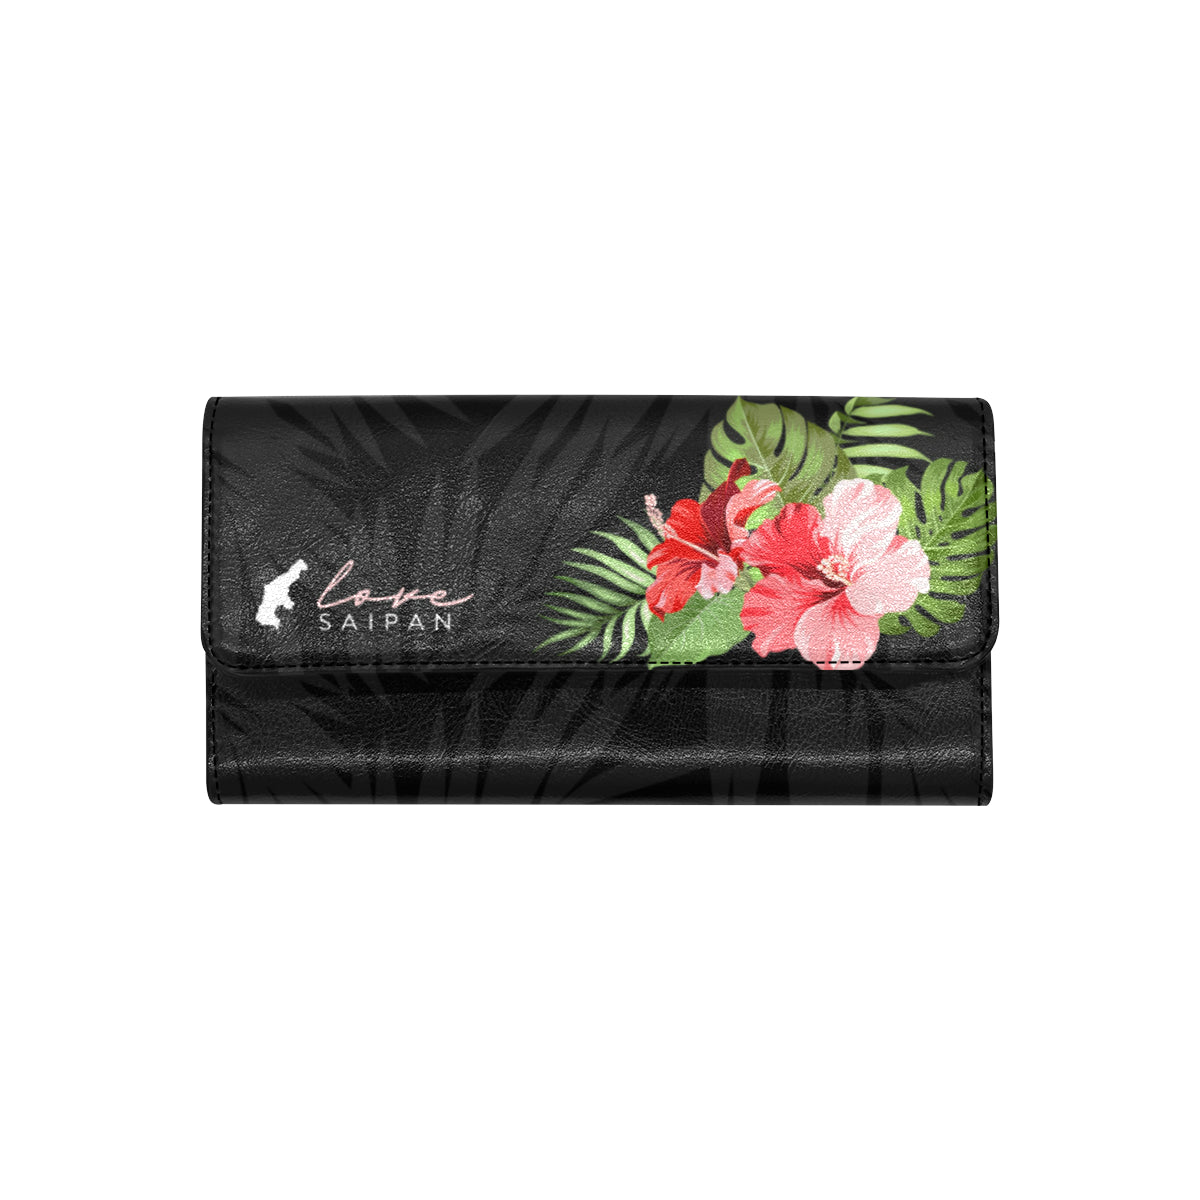 Love Saipan Red Hibiscus Women's Trifold Wallet